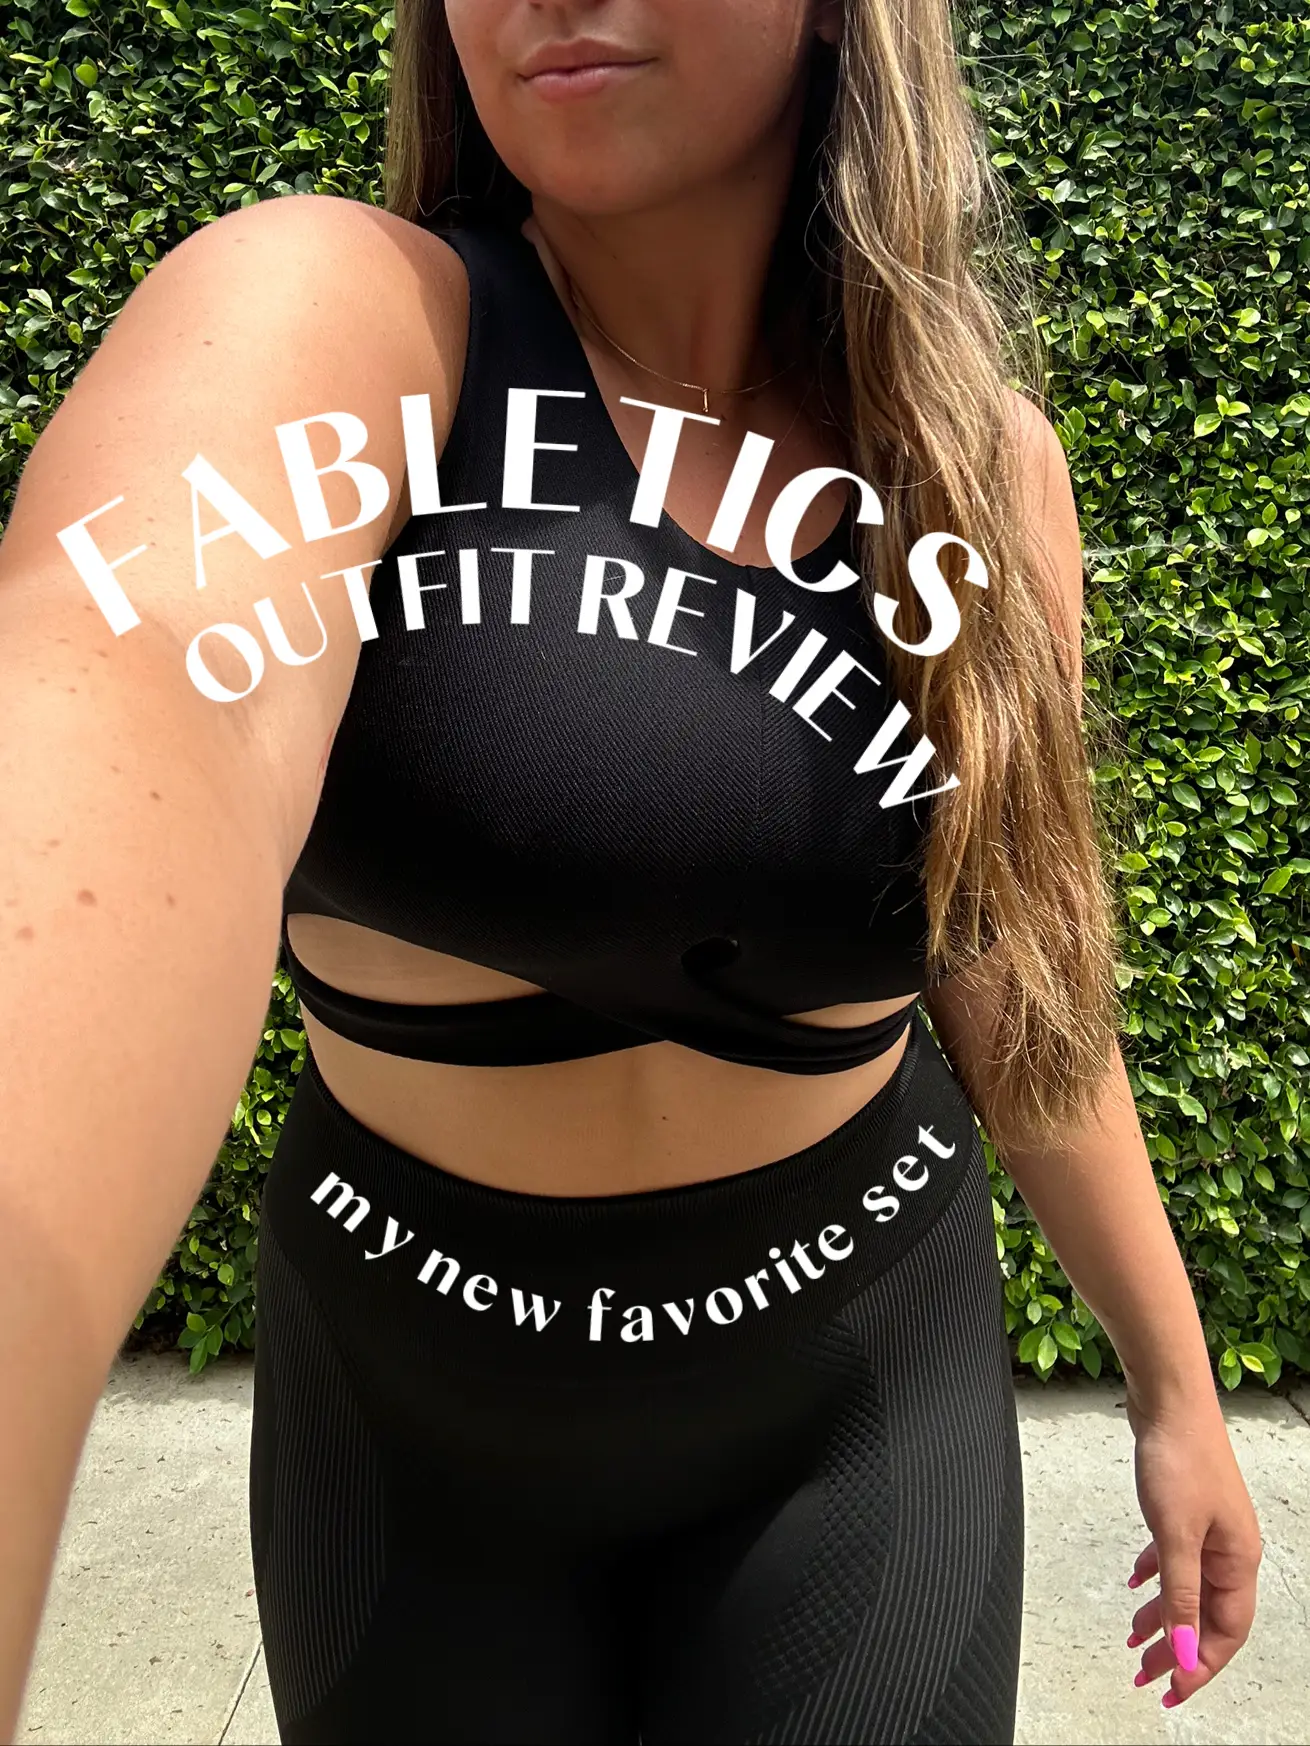 Baby when I tell you this set from @fabletics is everything! From